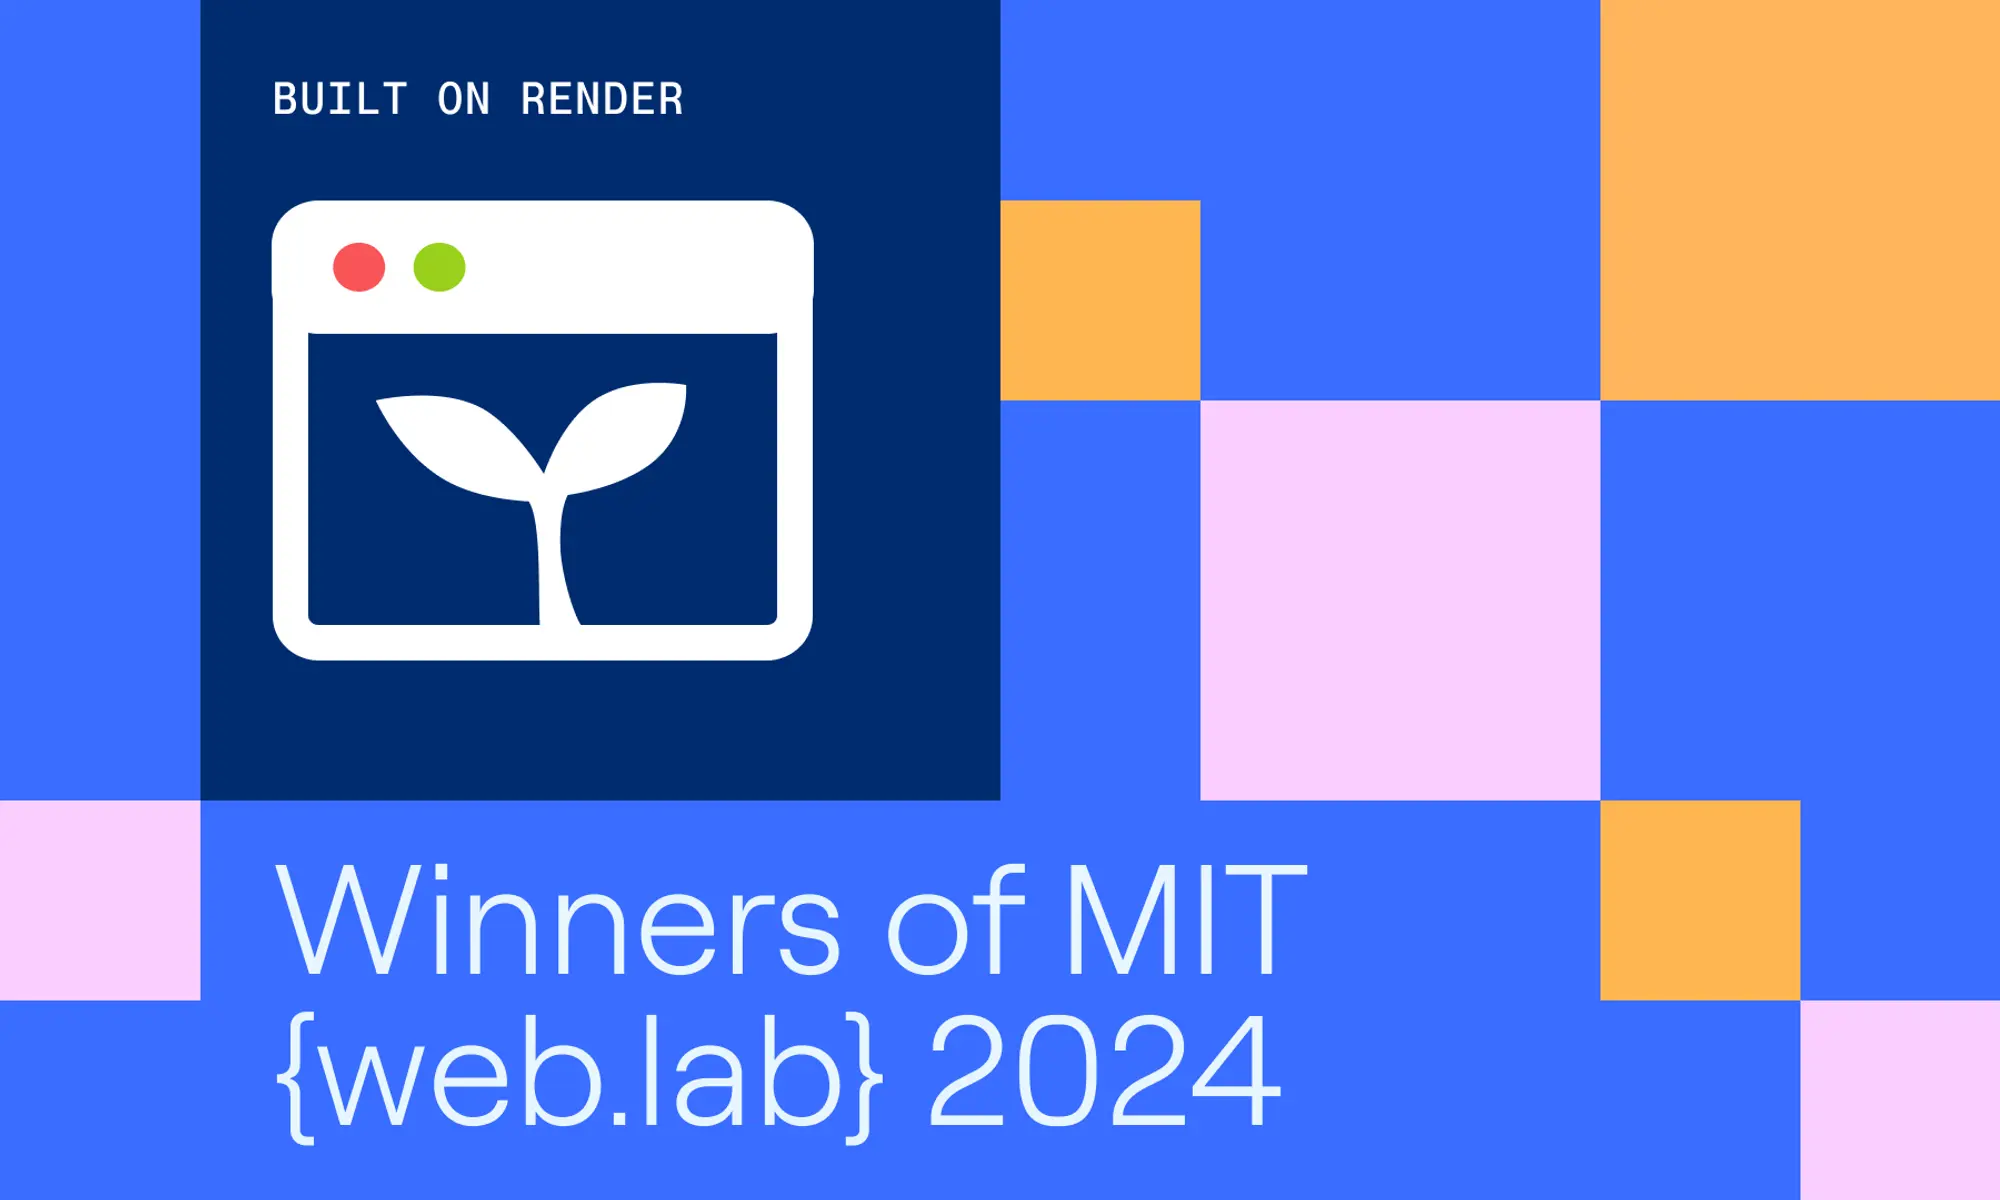 Built on Render: Four Winners from the MIT web.lab Competition